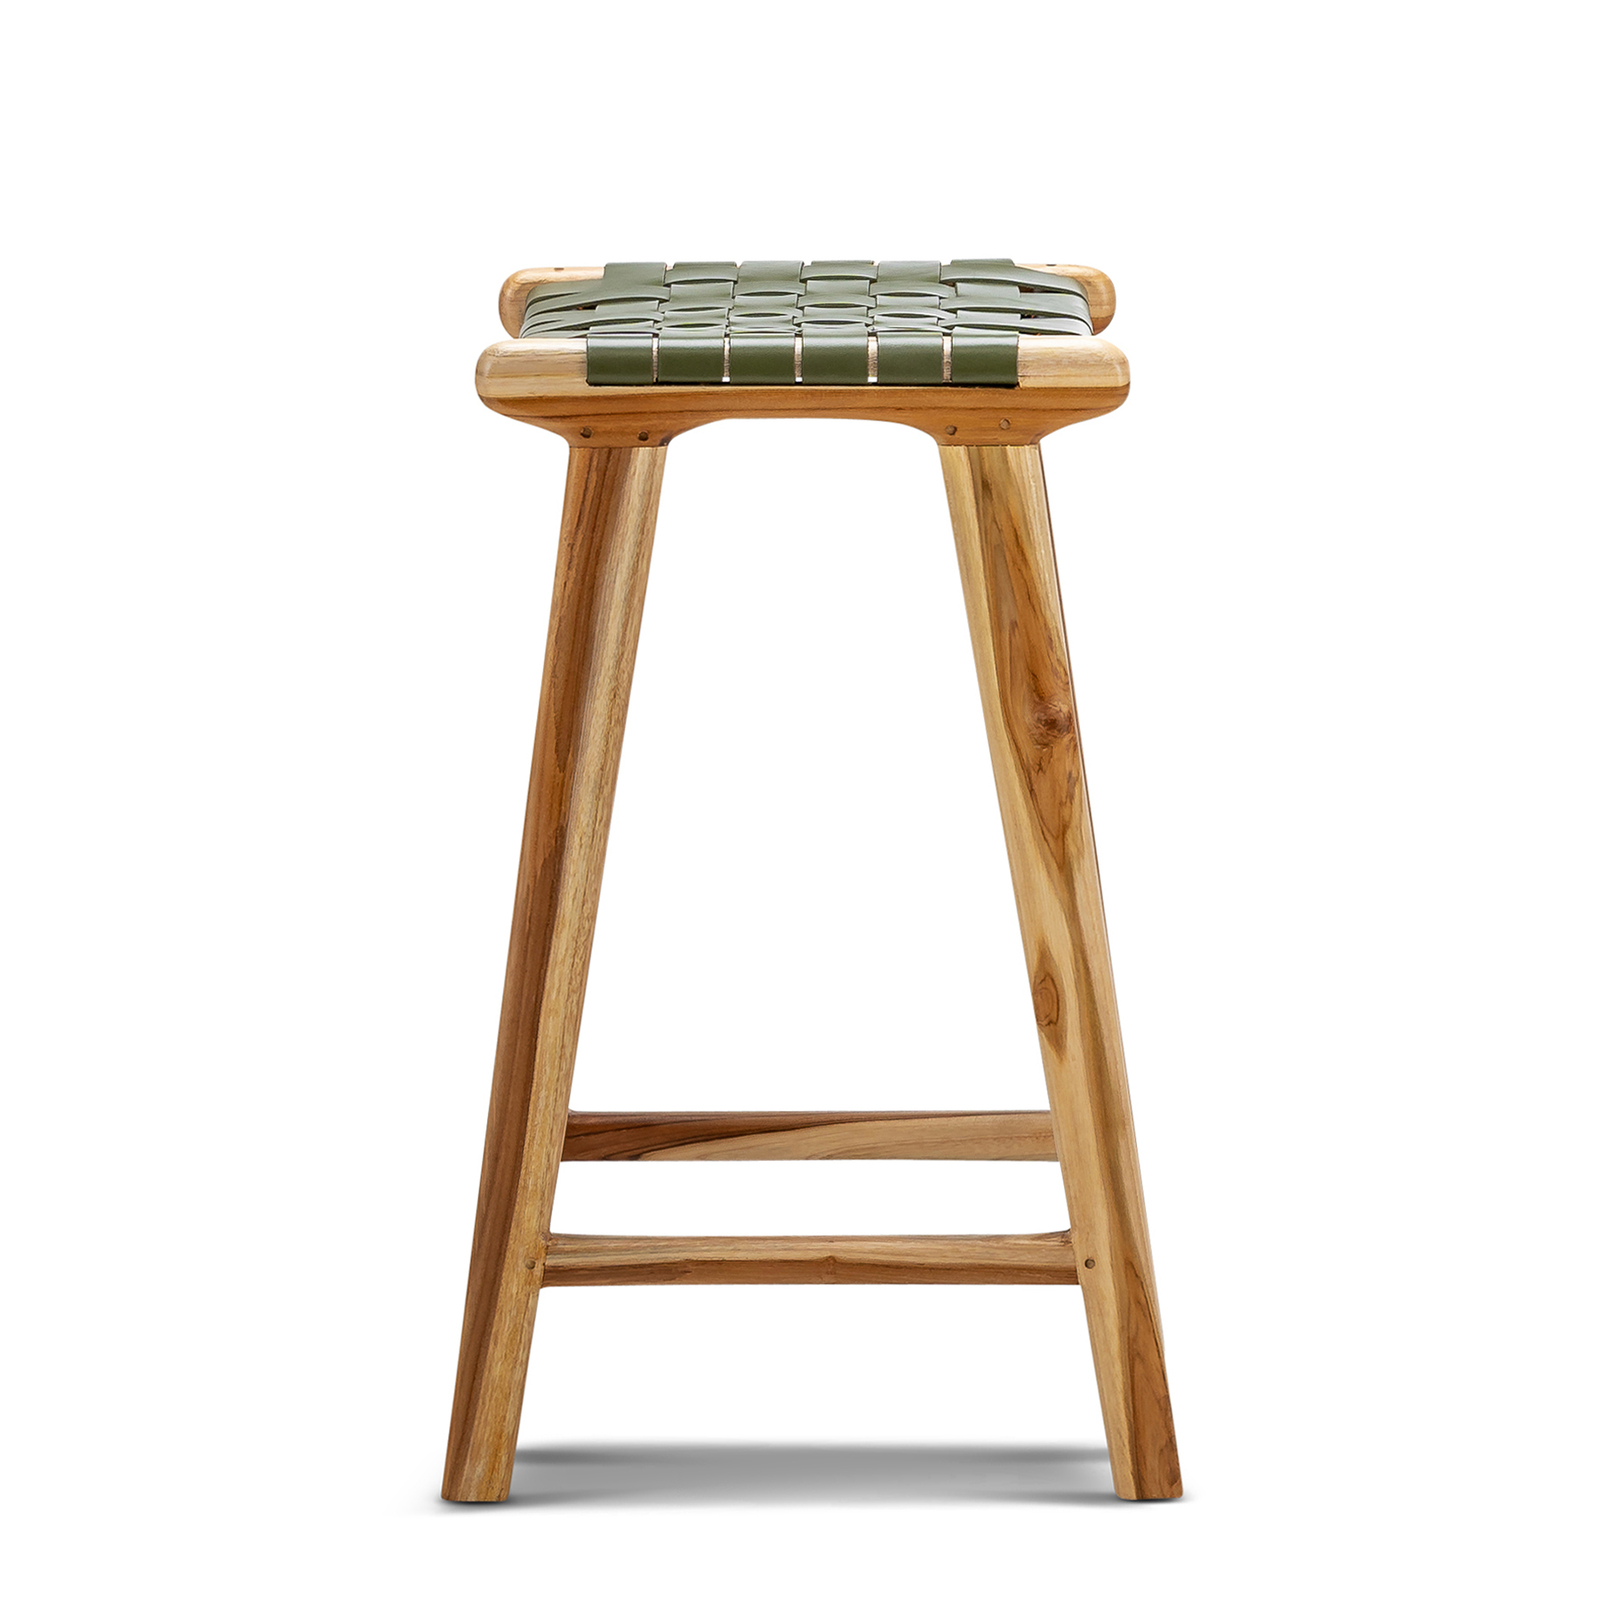 Lazie 66cm Leather Strapping Bar Stool, Olive Green Leather Bar Stools